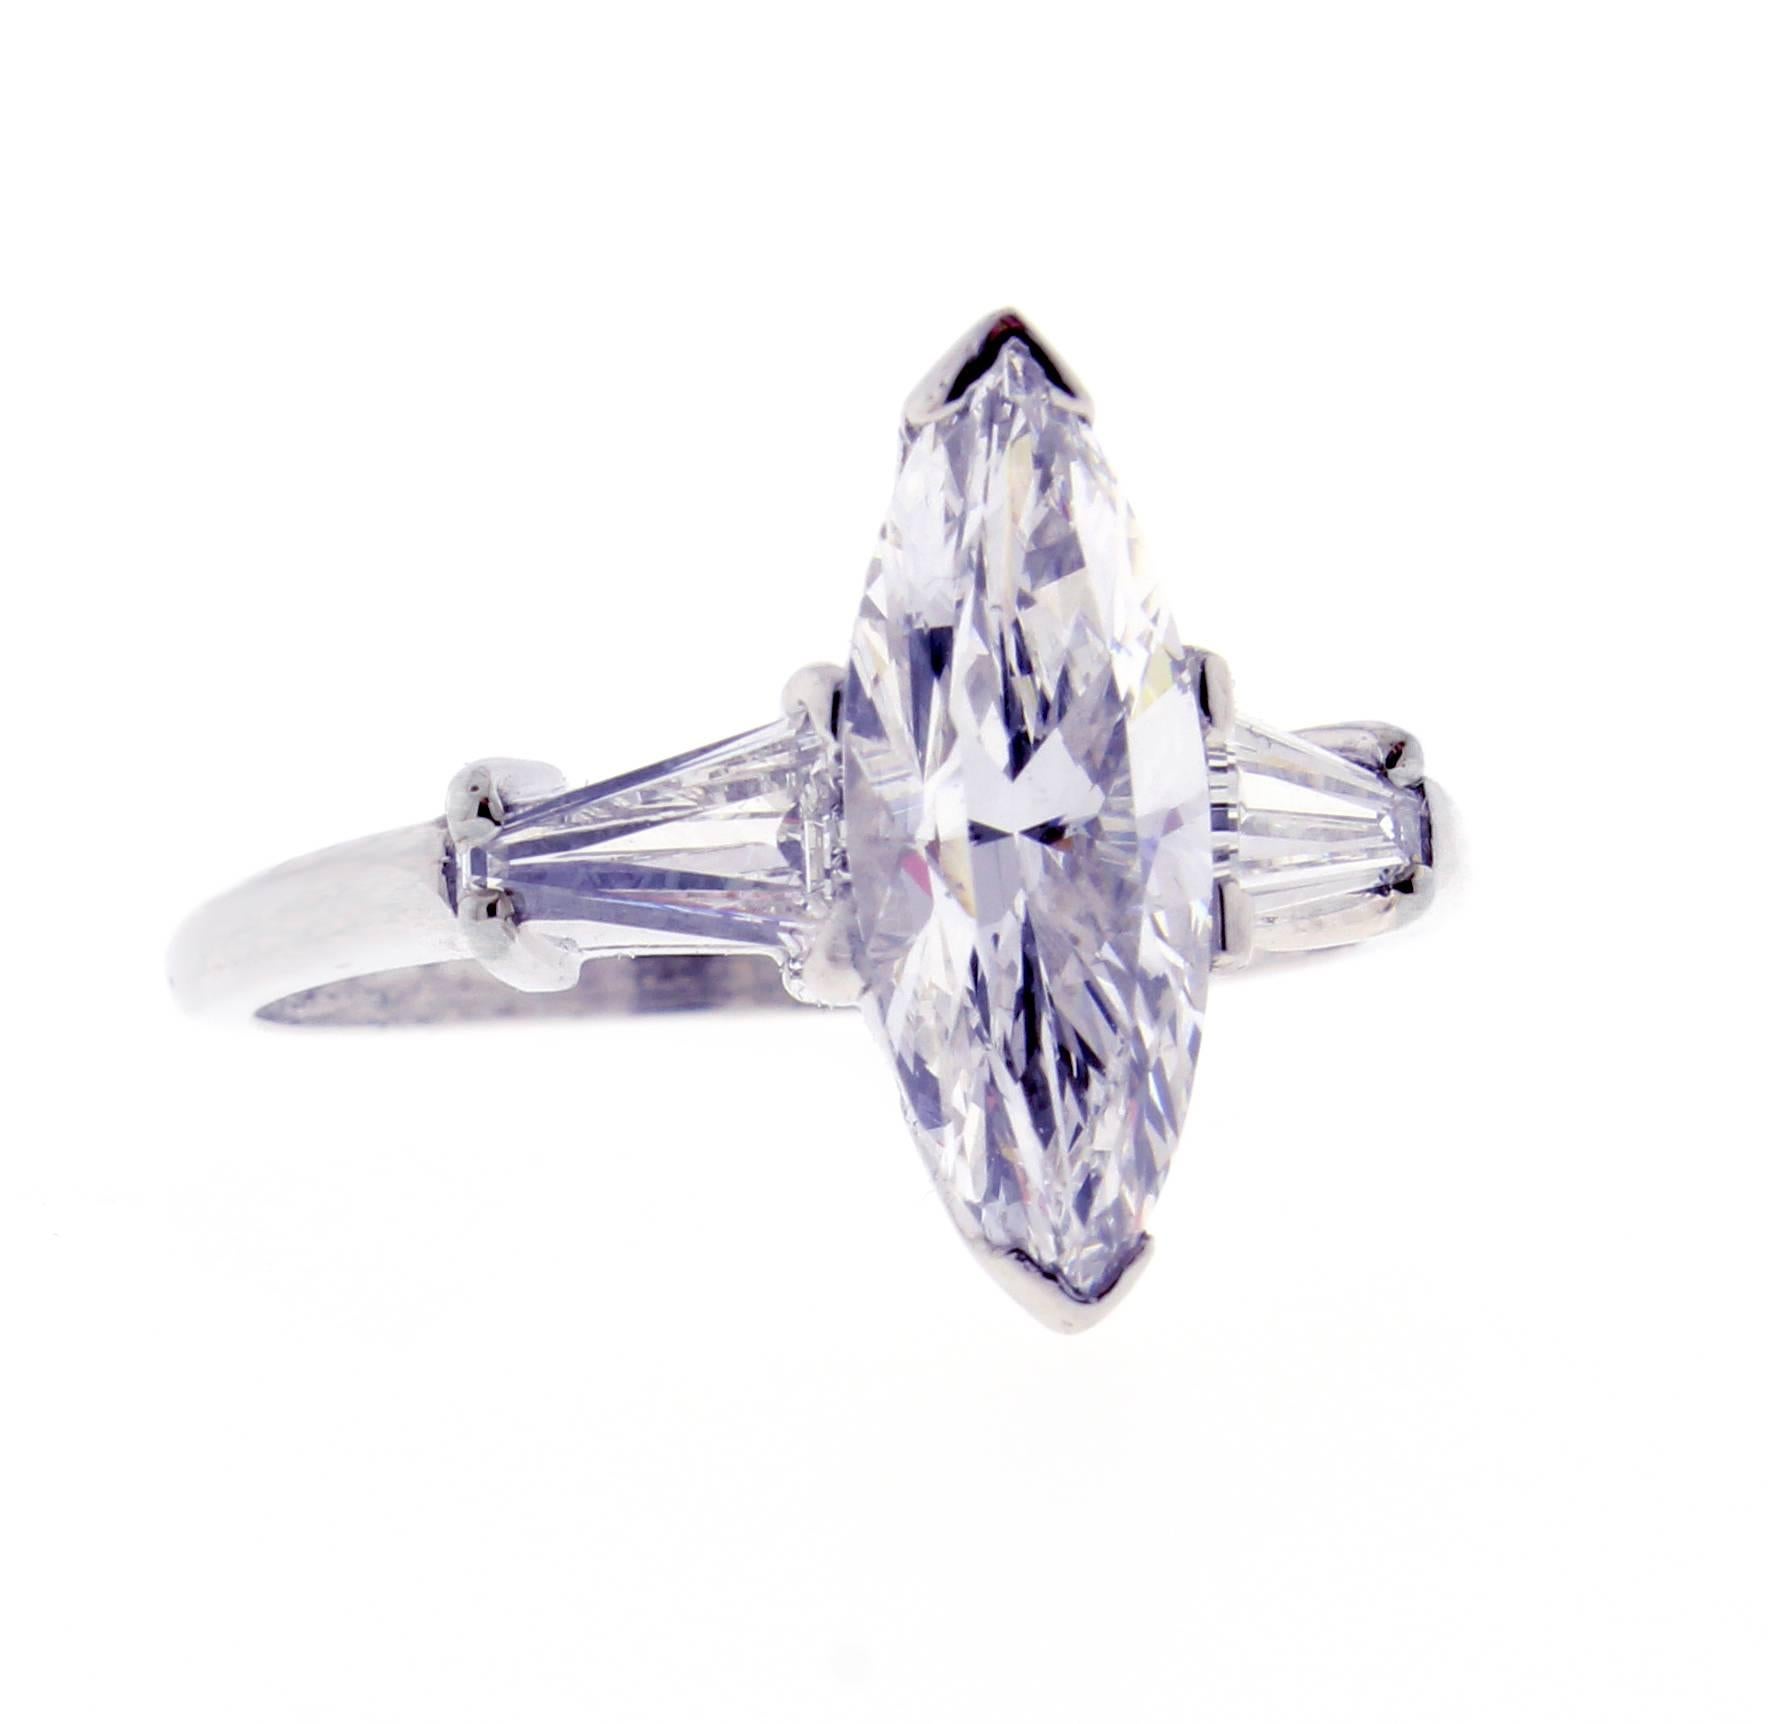 The G.I.A certified Marquise cut diamond weighs 1.80 carat. The diamond is D Color and VS2 clarity. The two tapered baguettes weigh approximately .75 carats total. Set in platinum, size 7 ¼ adjustable. Circa 1965